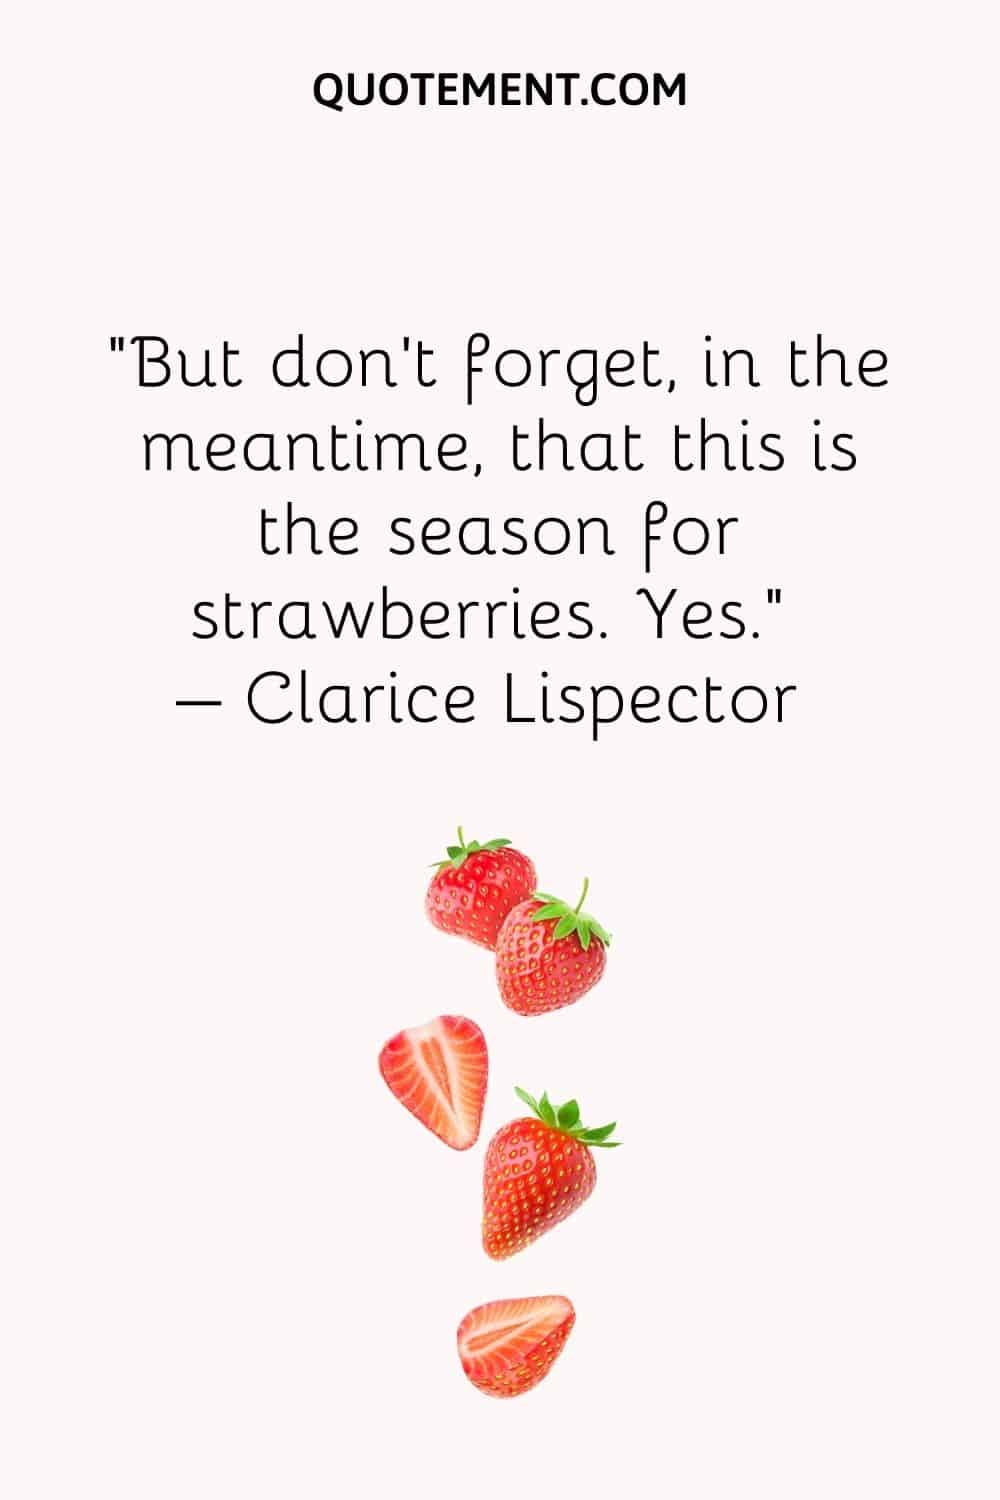 But don’t forget, in the meantime, that this is the season for strawberries